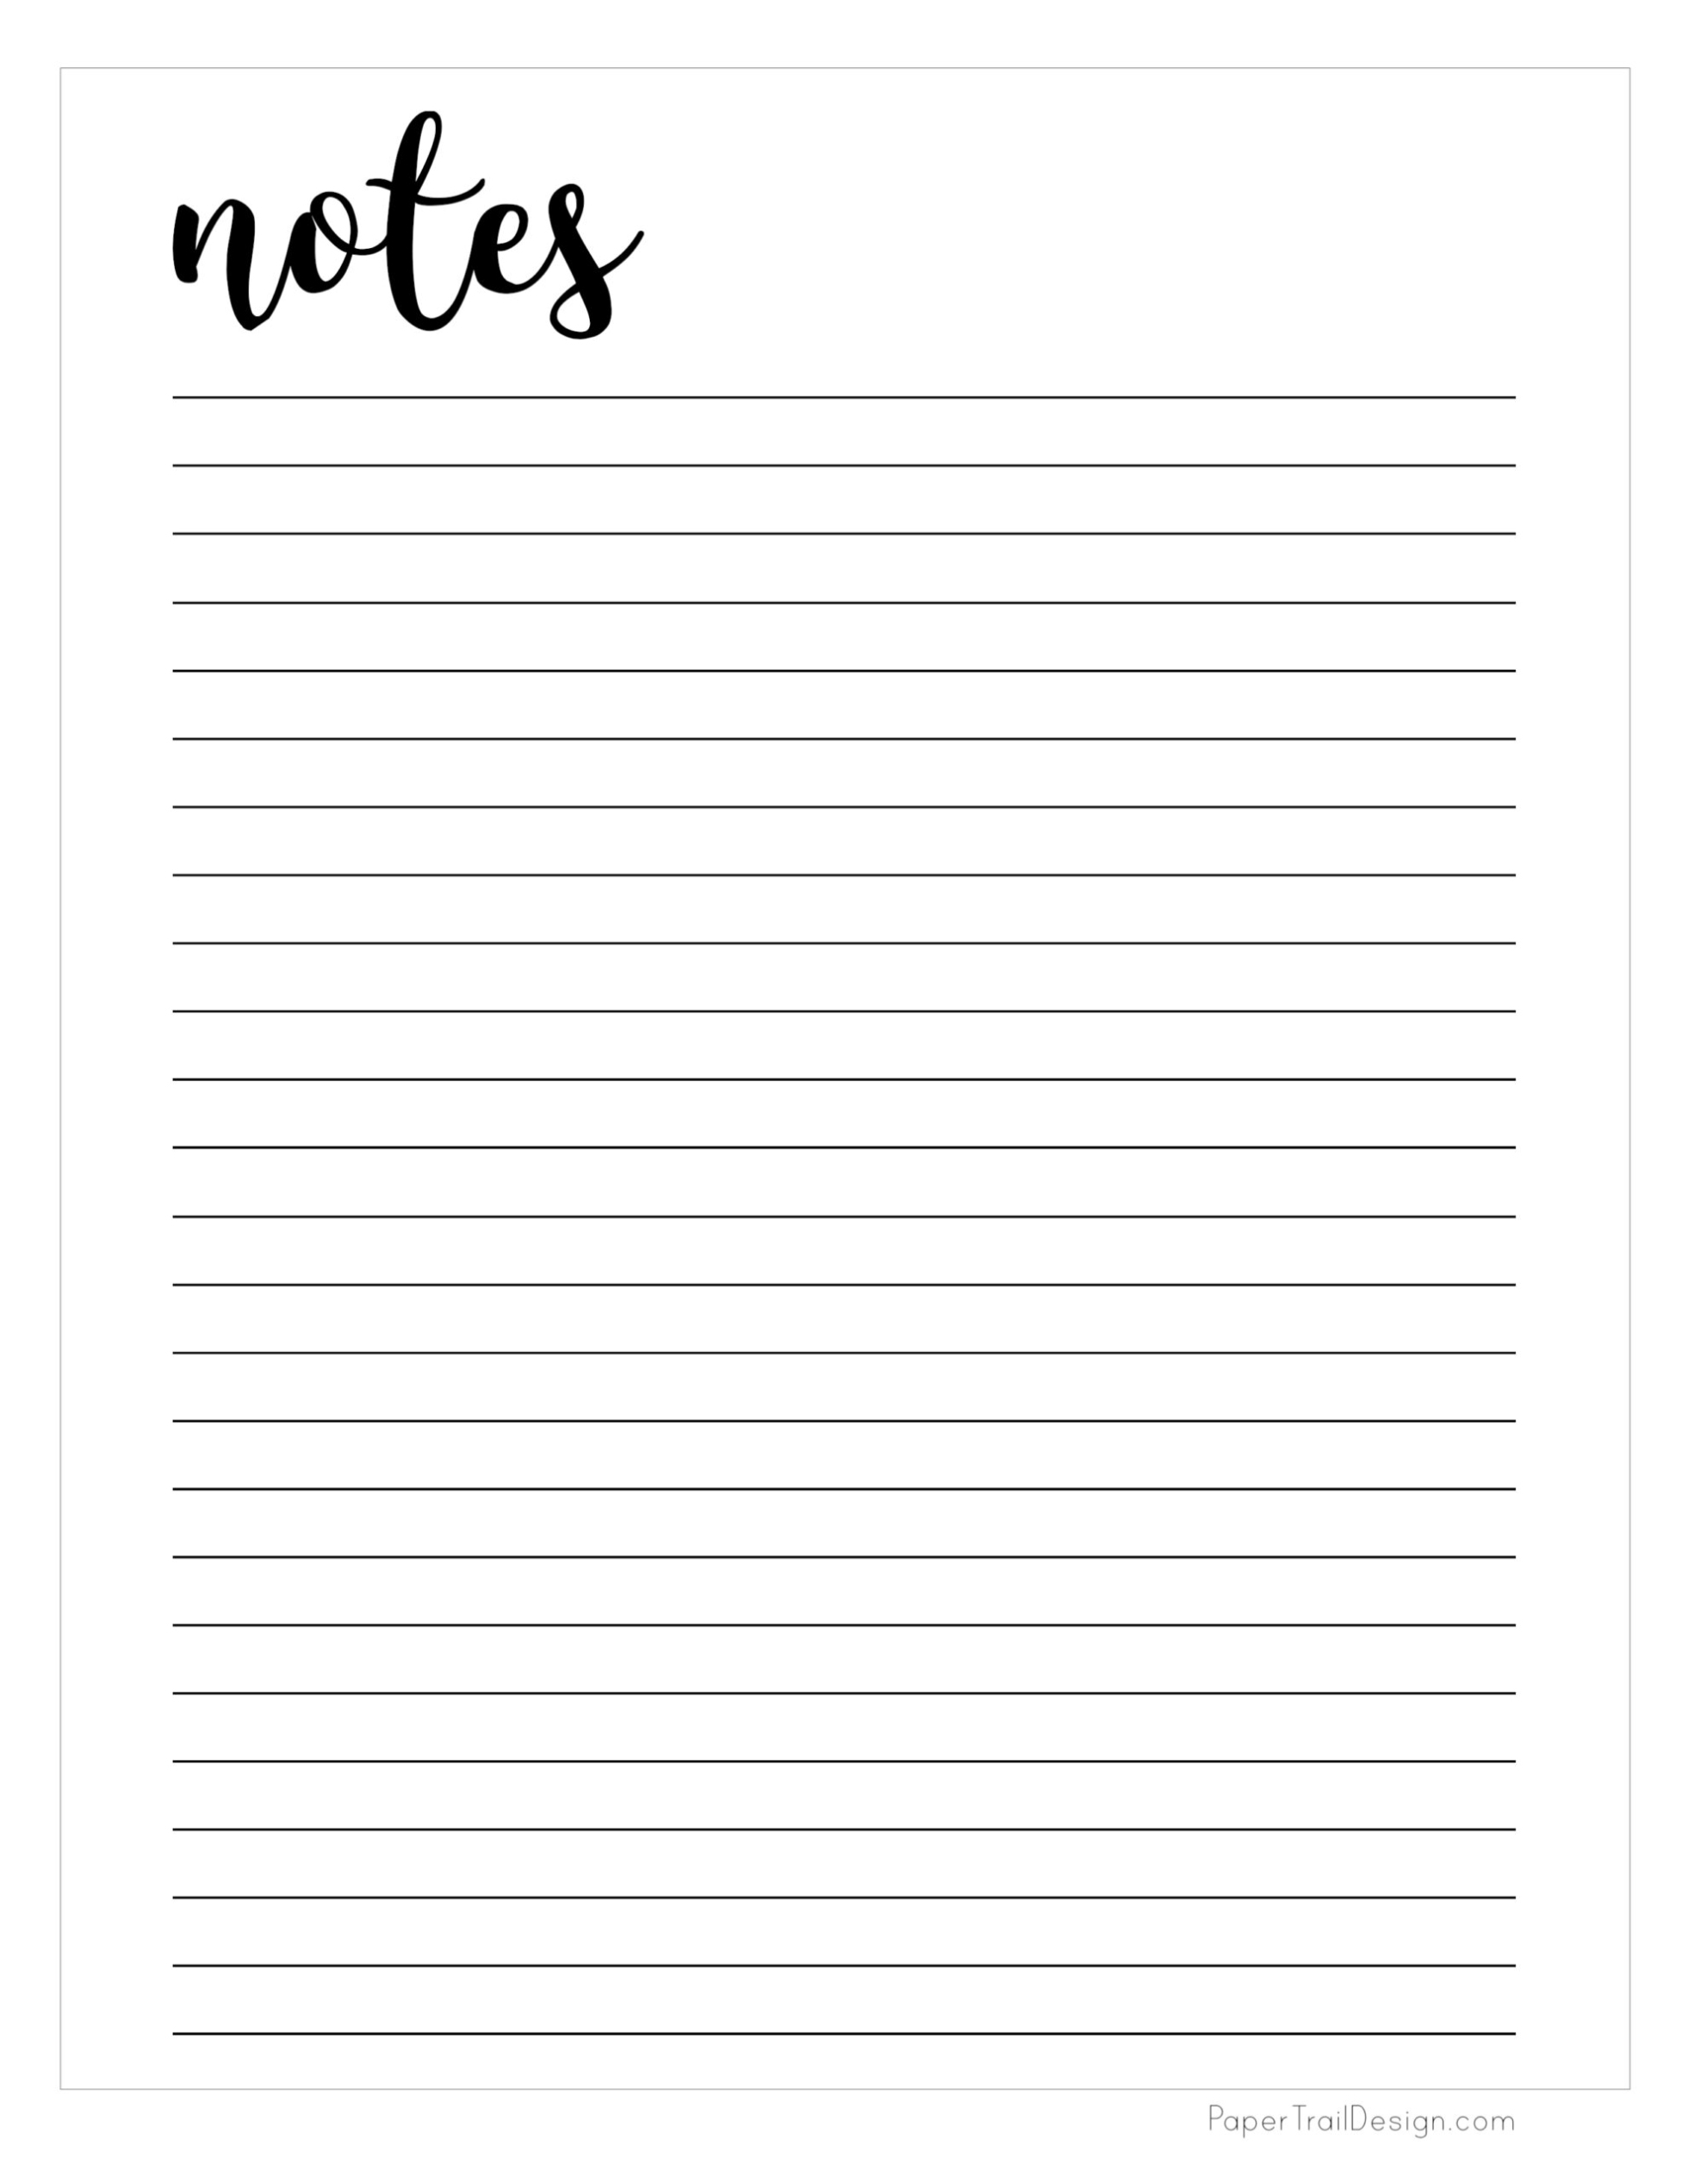 Au! 22+ Lister Over Free Printable Note Taking Templates! Try The For Note Taking Template Word